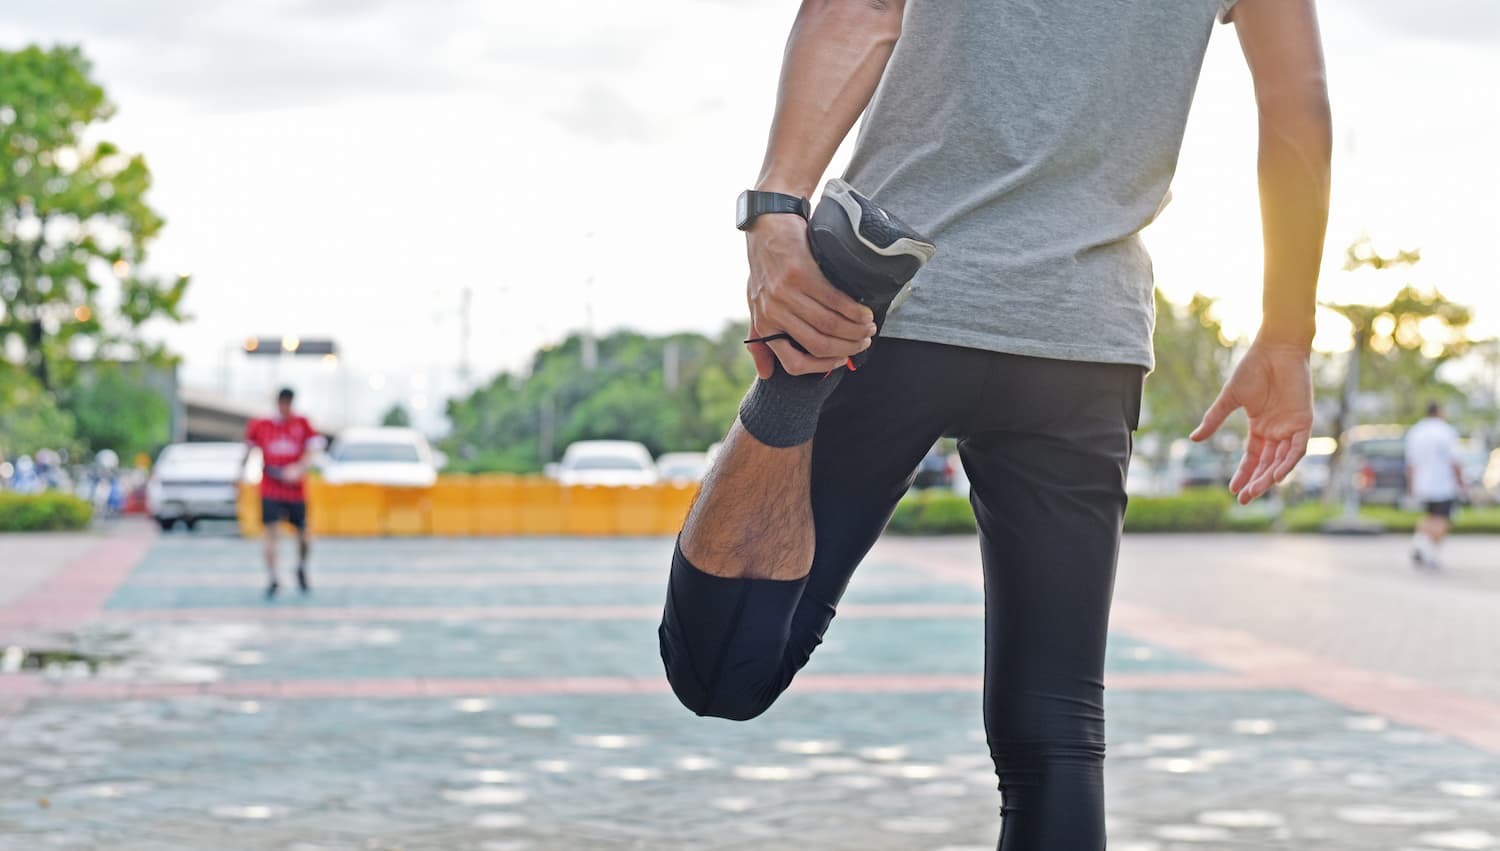 A runner stretching out his leg before a run